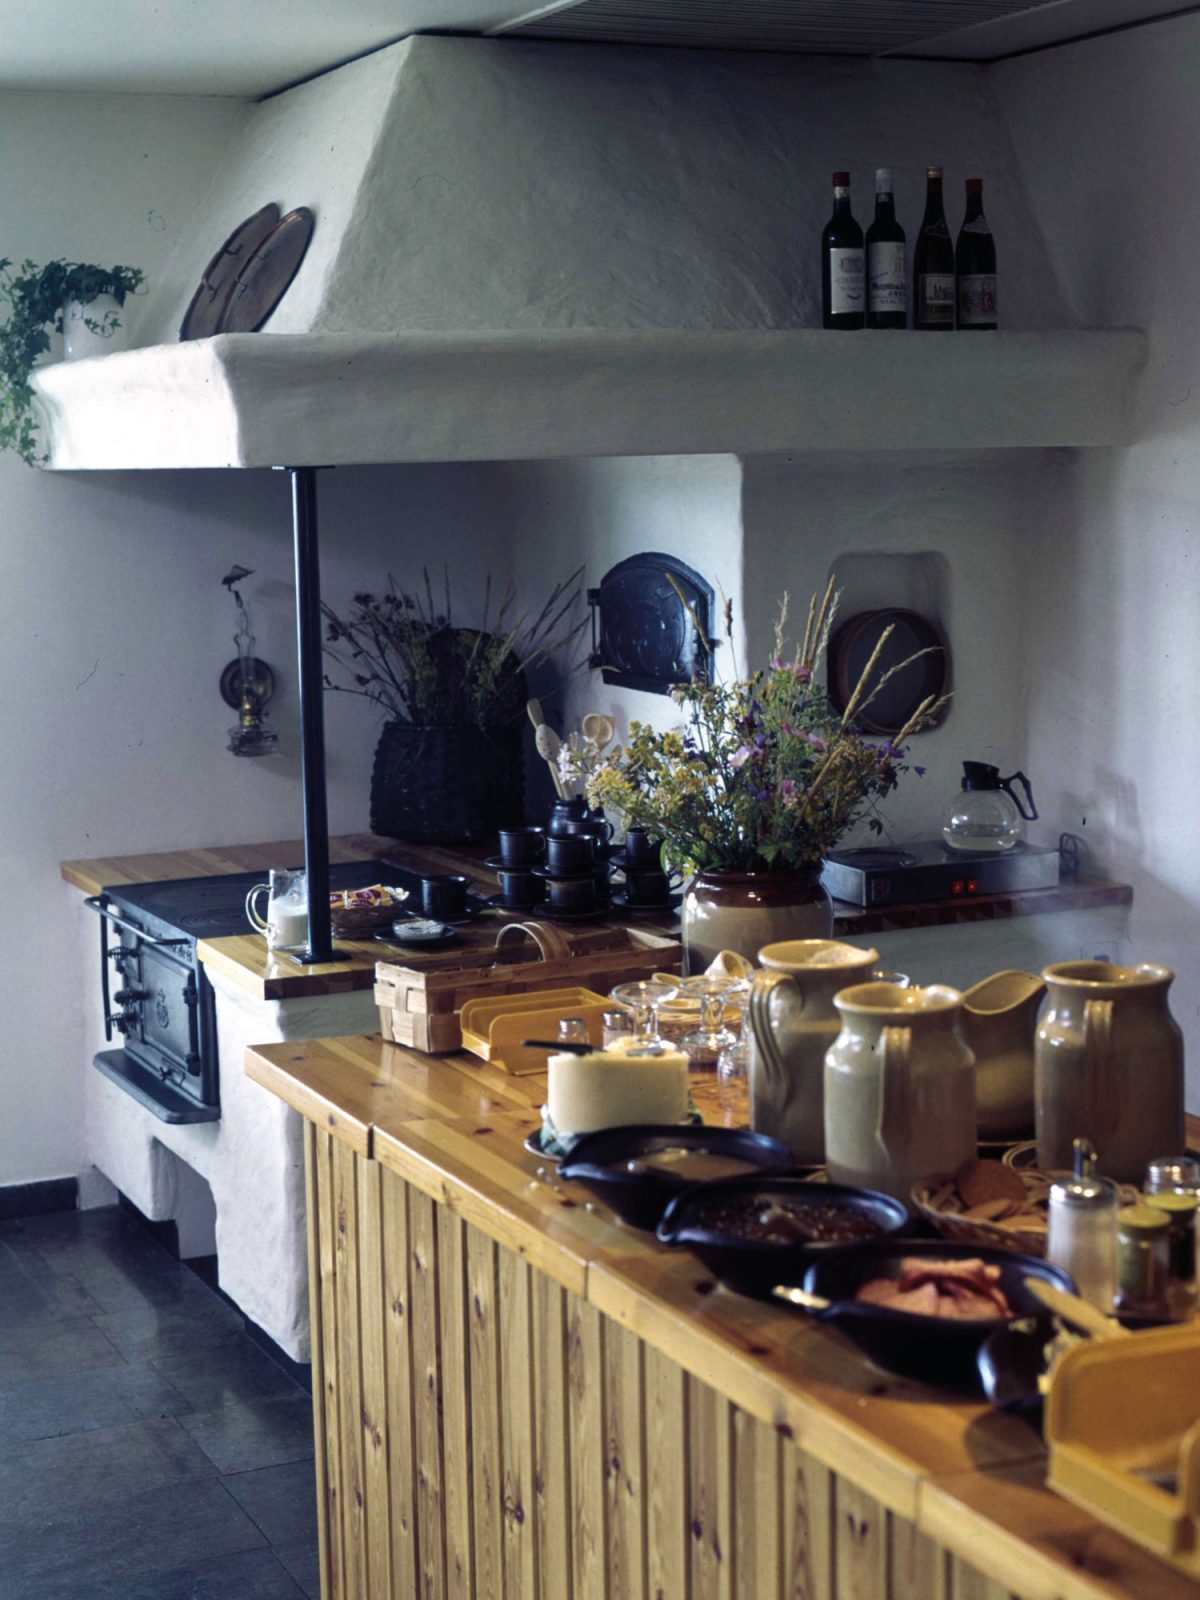 A laid-out buffet next to an old built-in iron stove.